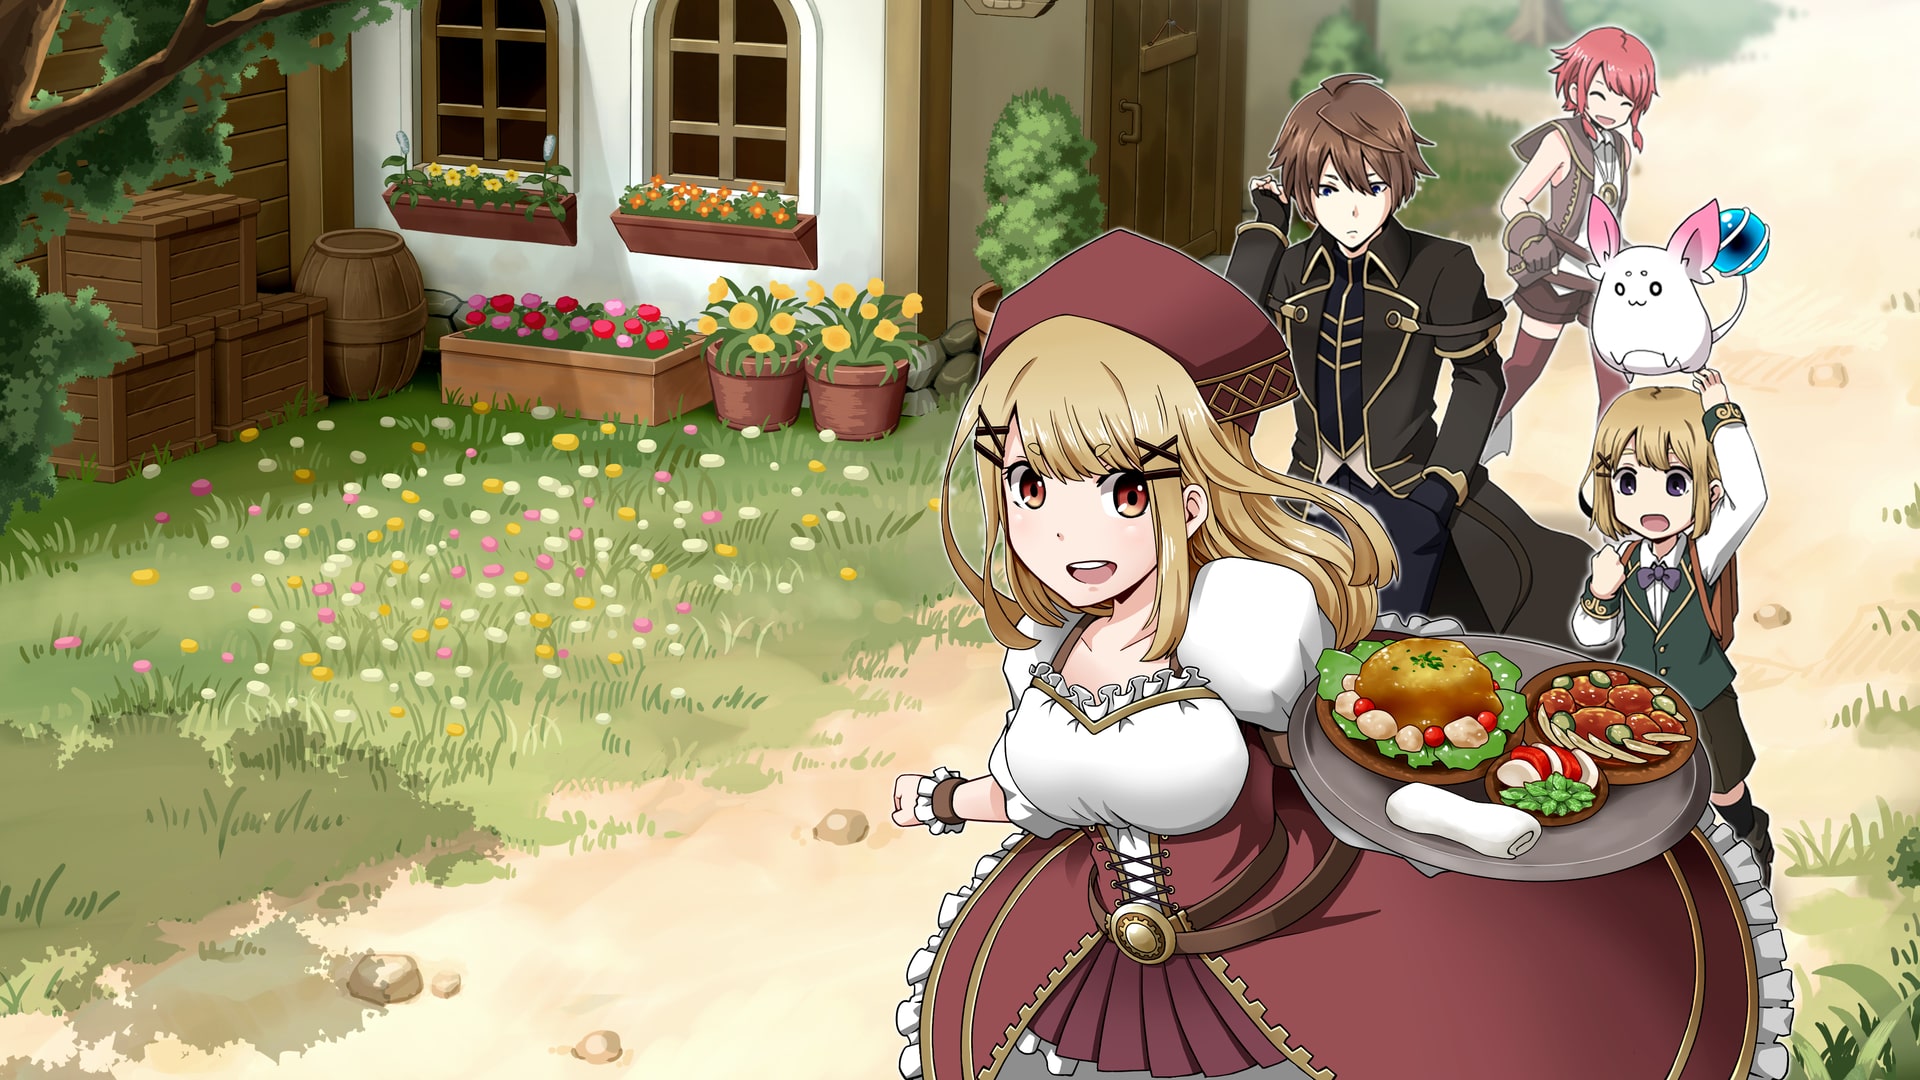 Marenian Tavern Story: Patty and the Hungry God (English Ver.)